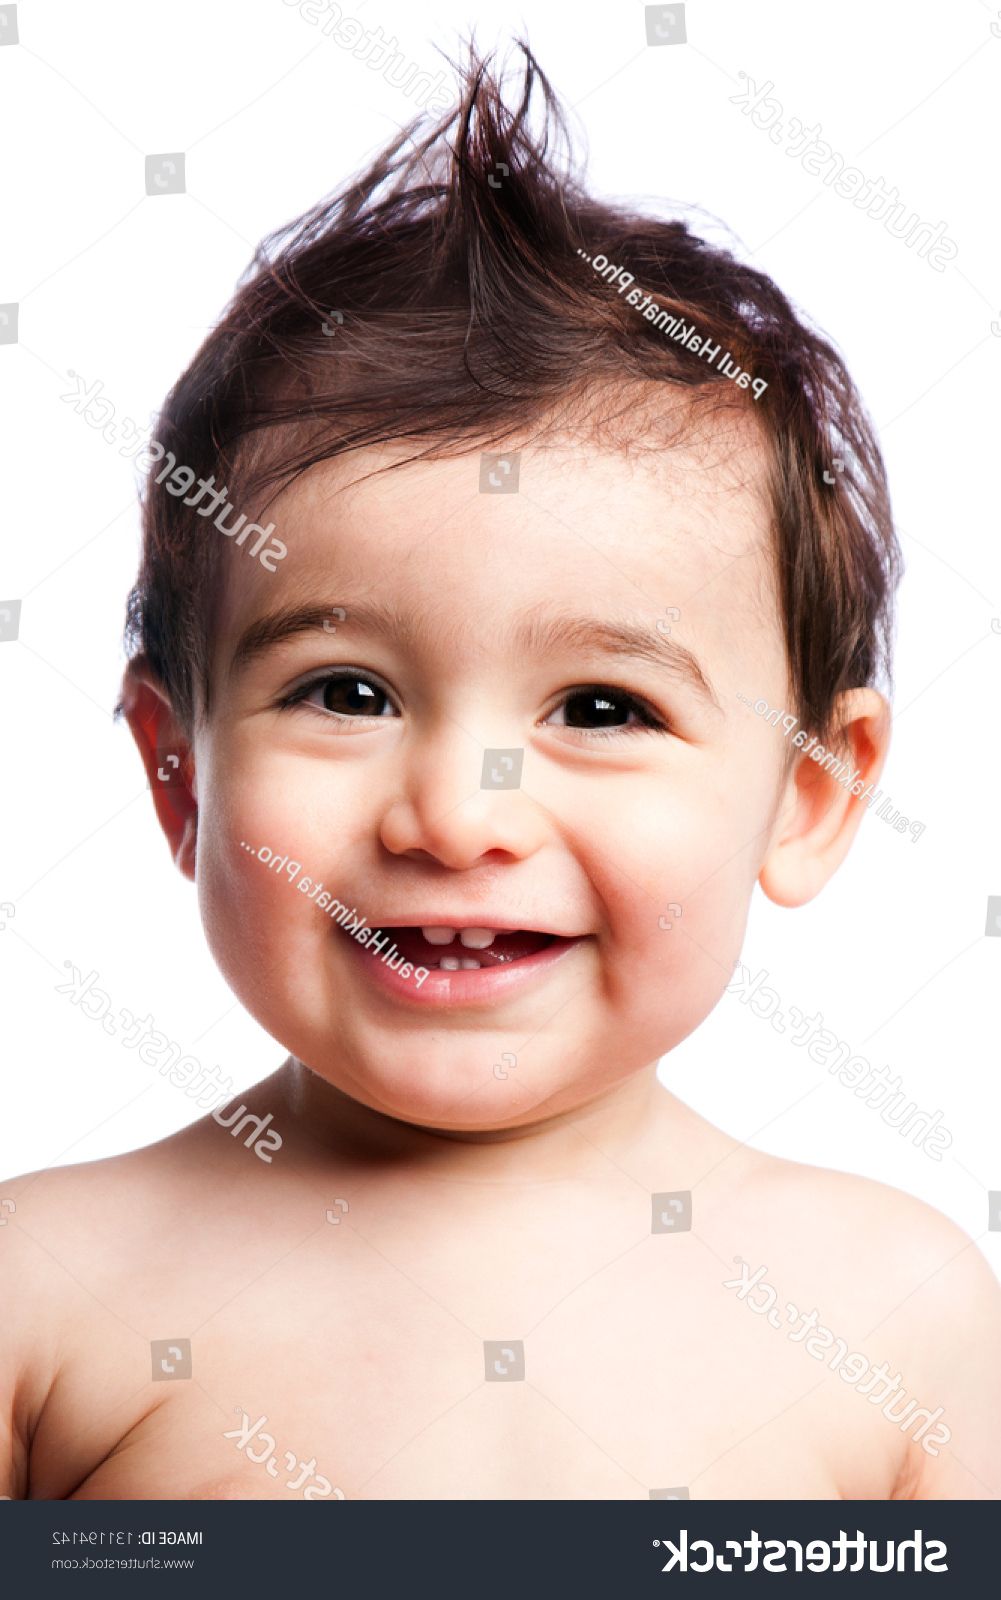 Most Up To Date Innocent And Sweet Mohawk Hairstyles For Cute Happy Smiling Teething Baby Toddler Stock Photo (edit Now (View 13 of 20)